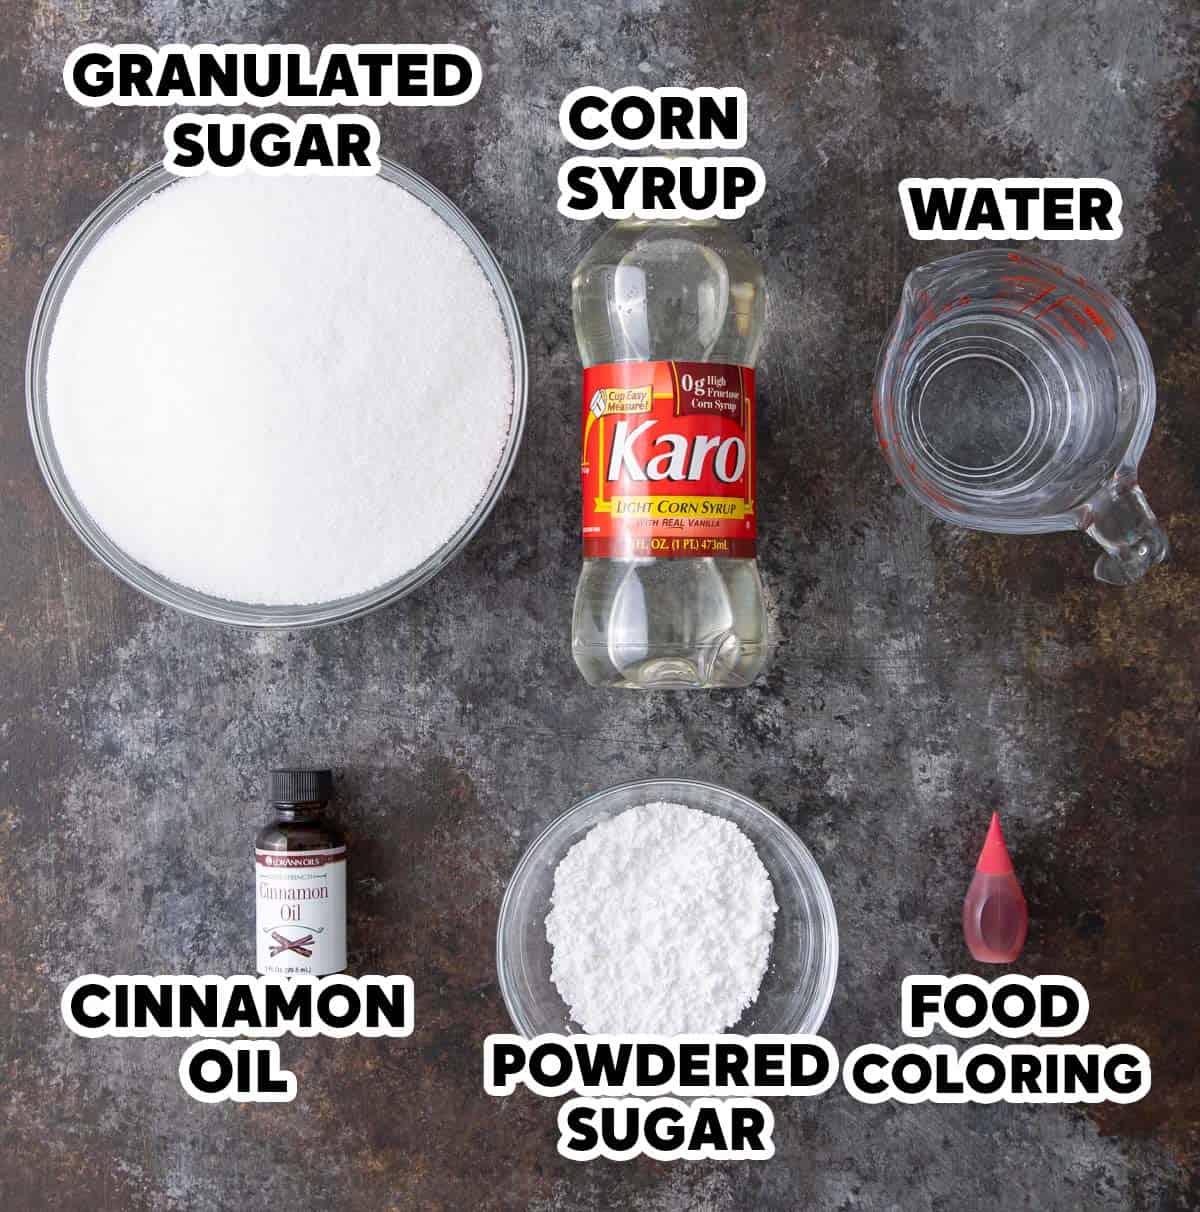 Overhead view of ingredients for making cinnamon candy.